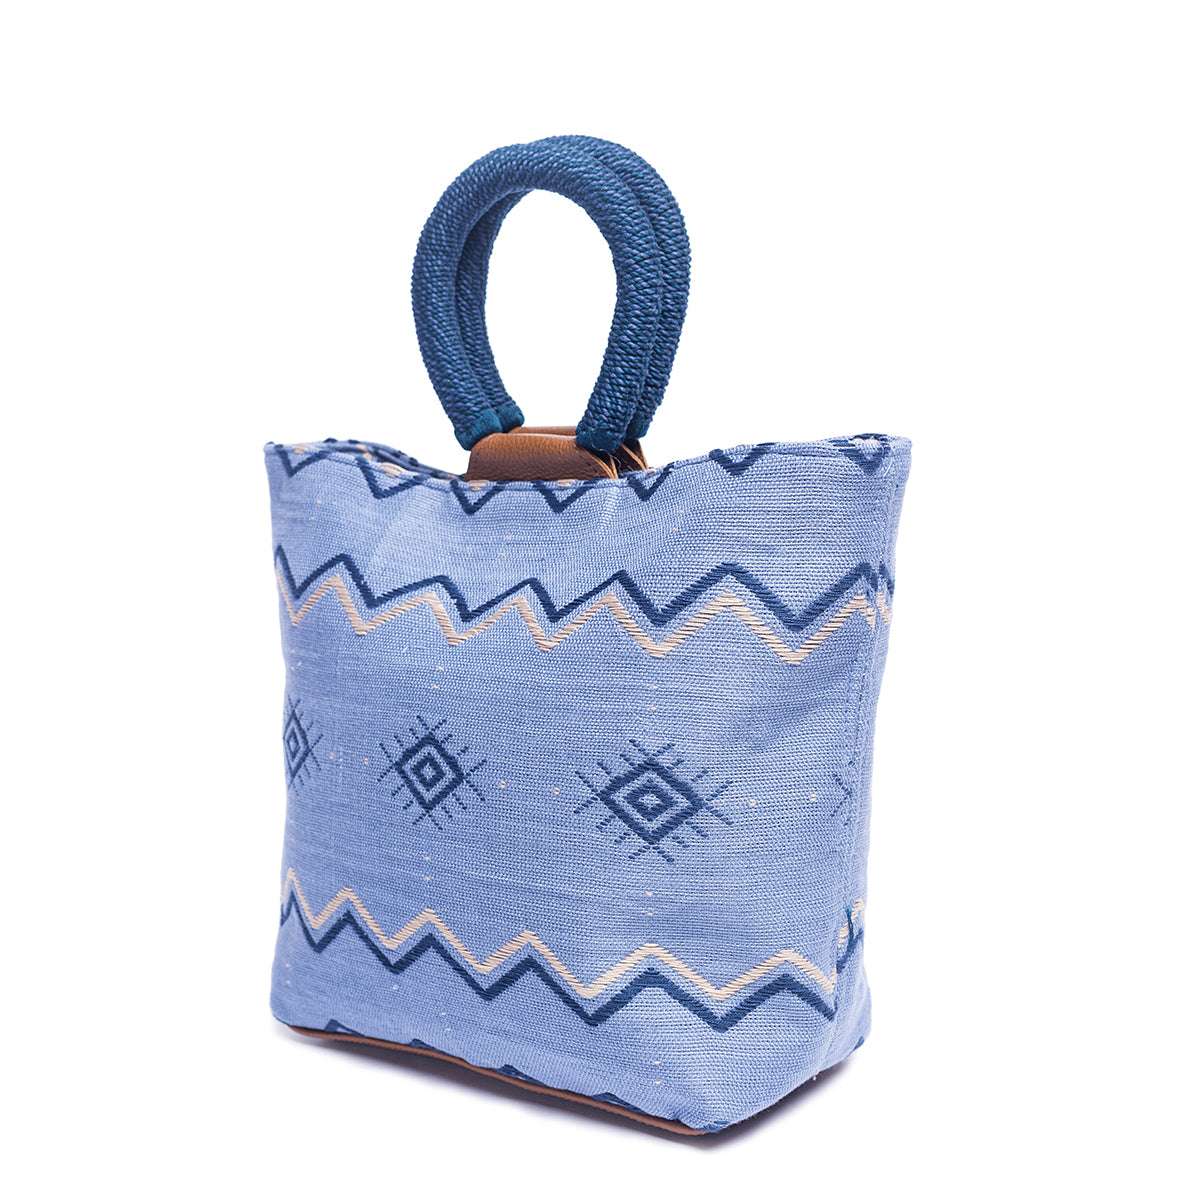 A side view of the hand woven artisan Dalila Midi Tote in Mountain Blue. The photo shows the tote without the leather strap.